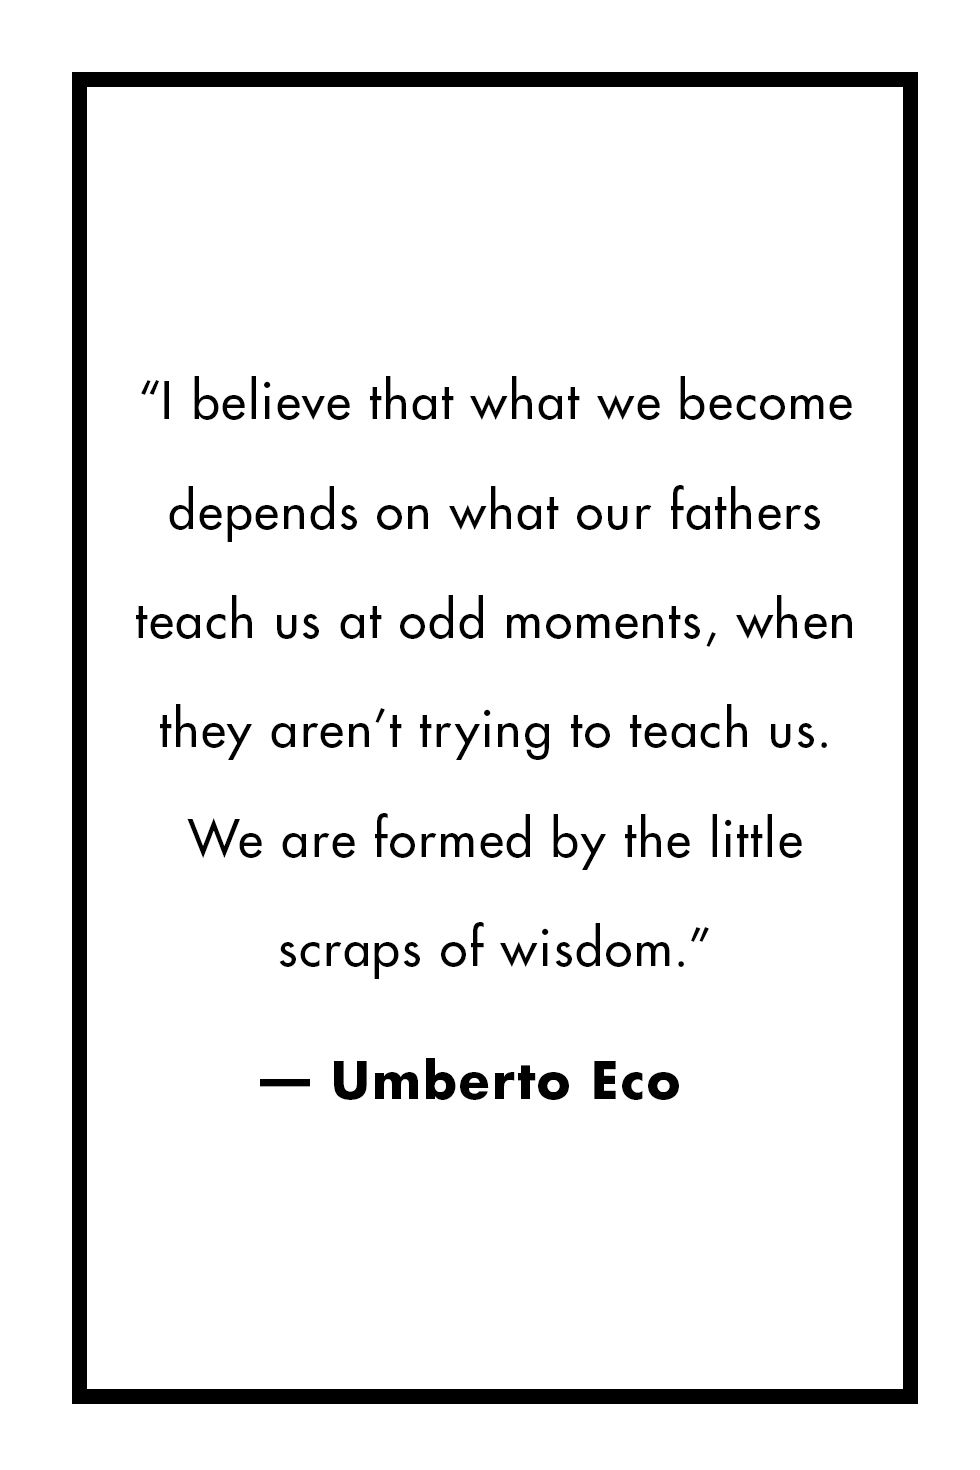 i believe that what we become depends on what our fathers teach us at odd moments, when they aren’t trying to teach us. we are formed by the little scraps of wisdom. umberto eco